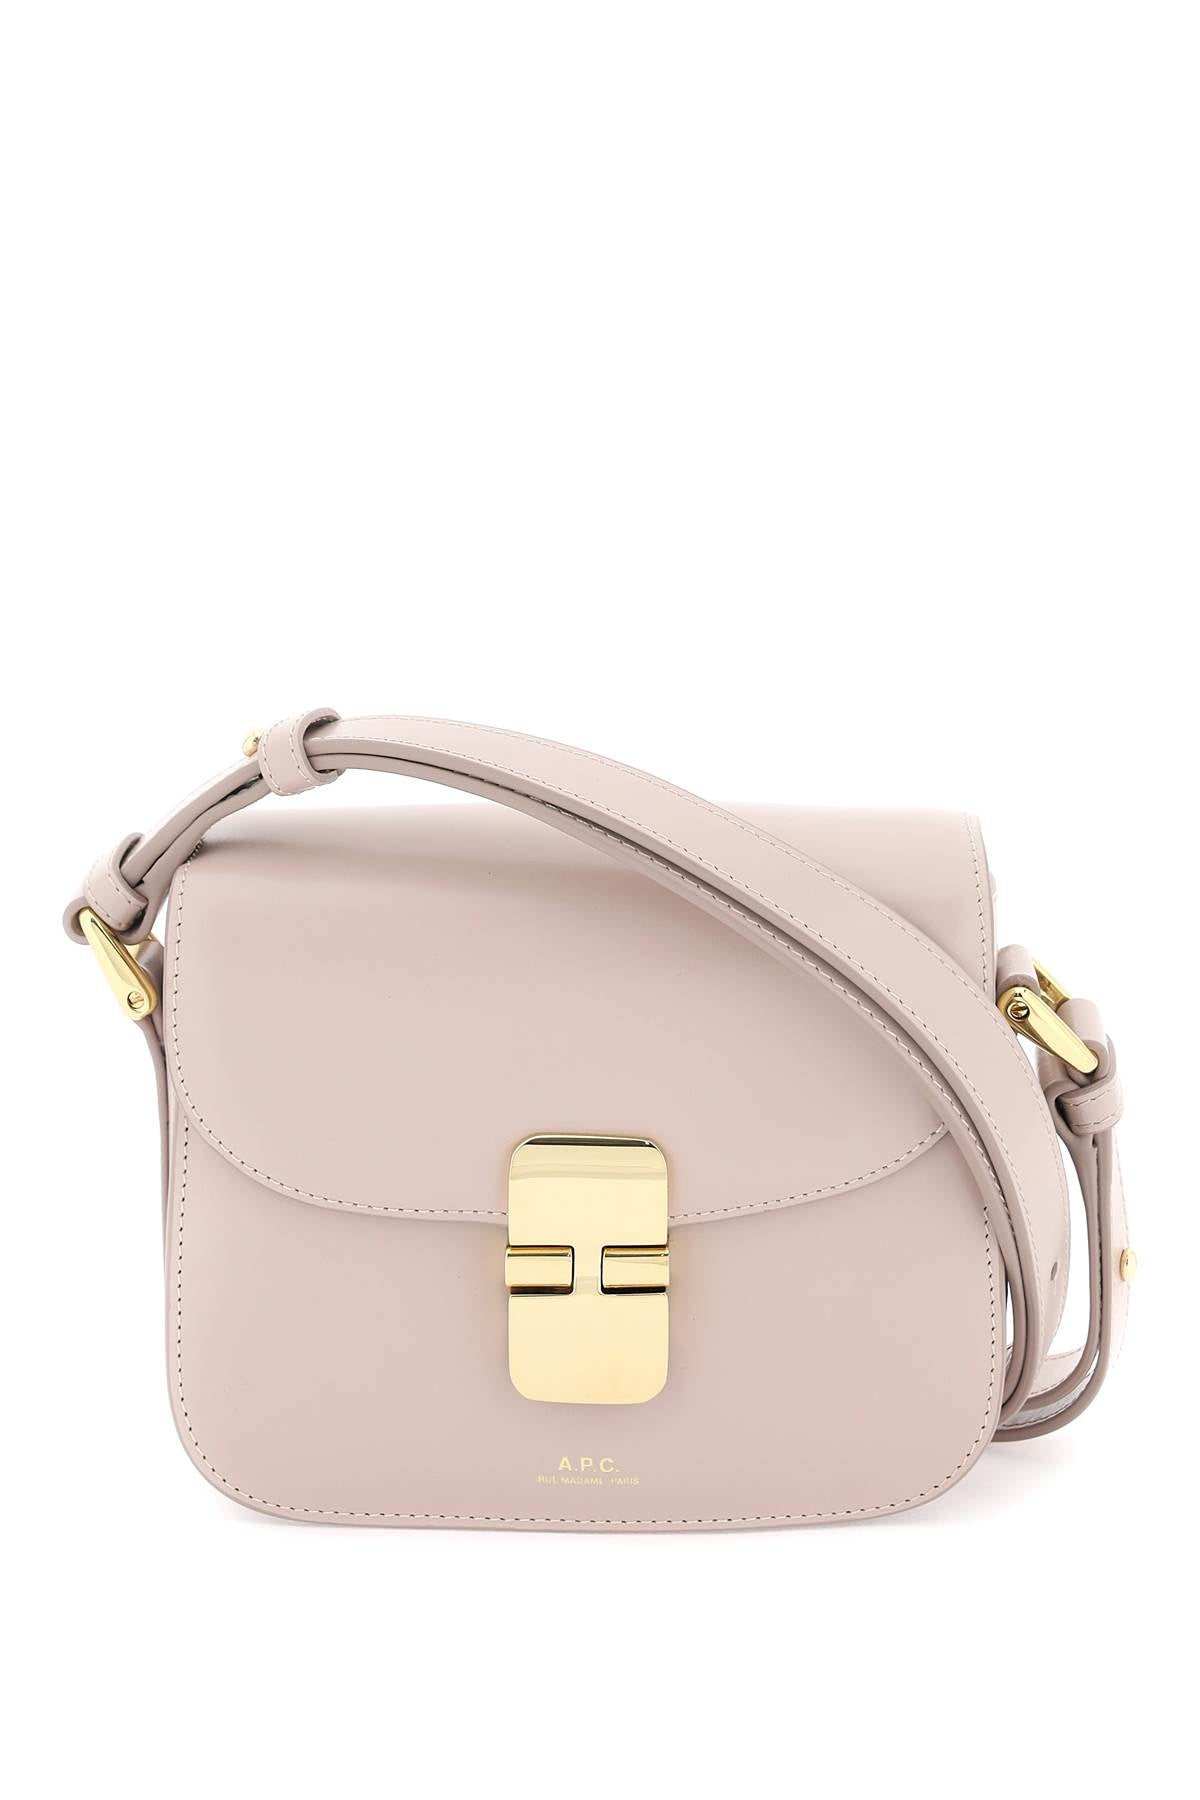 A.P.C. Grace Mini Multicolor Leather Handbag with Adjustable Strap and Gold-Tone Accents